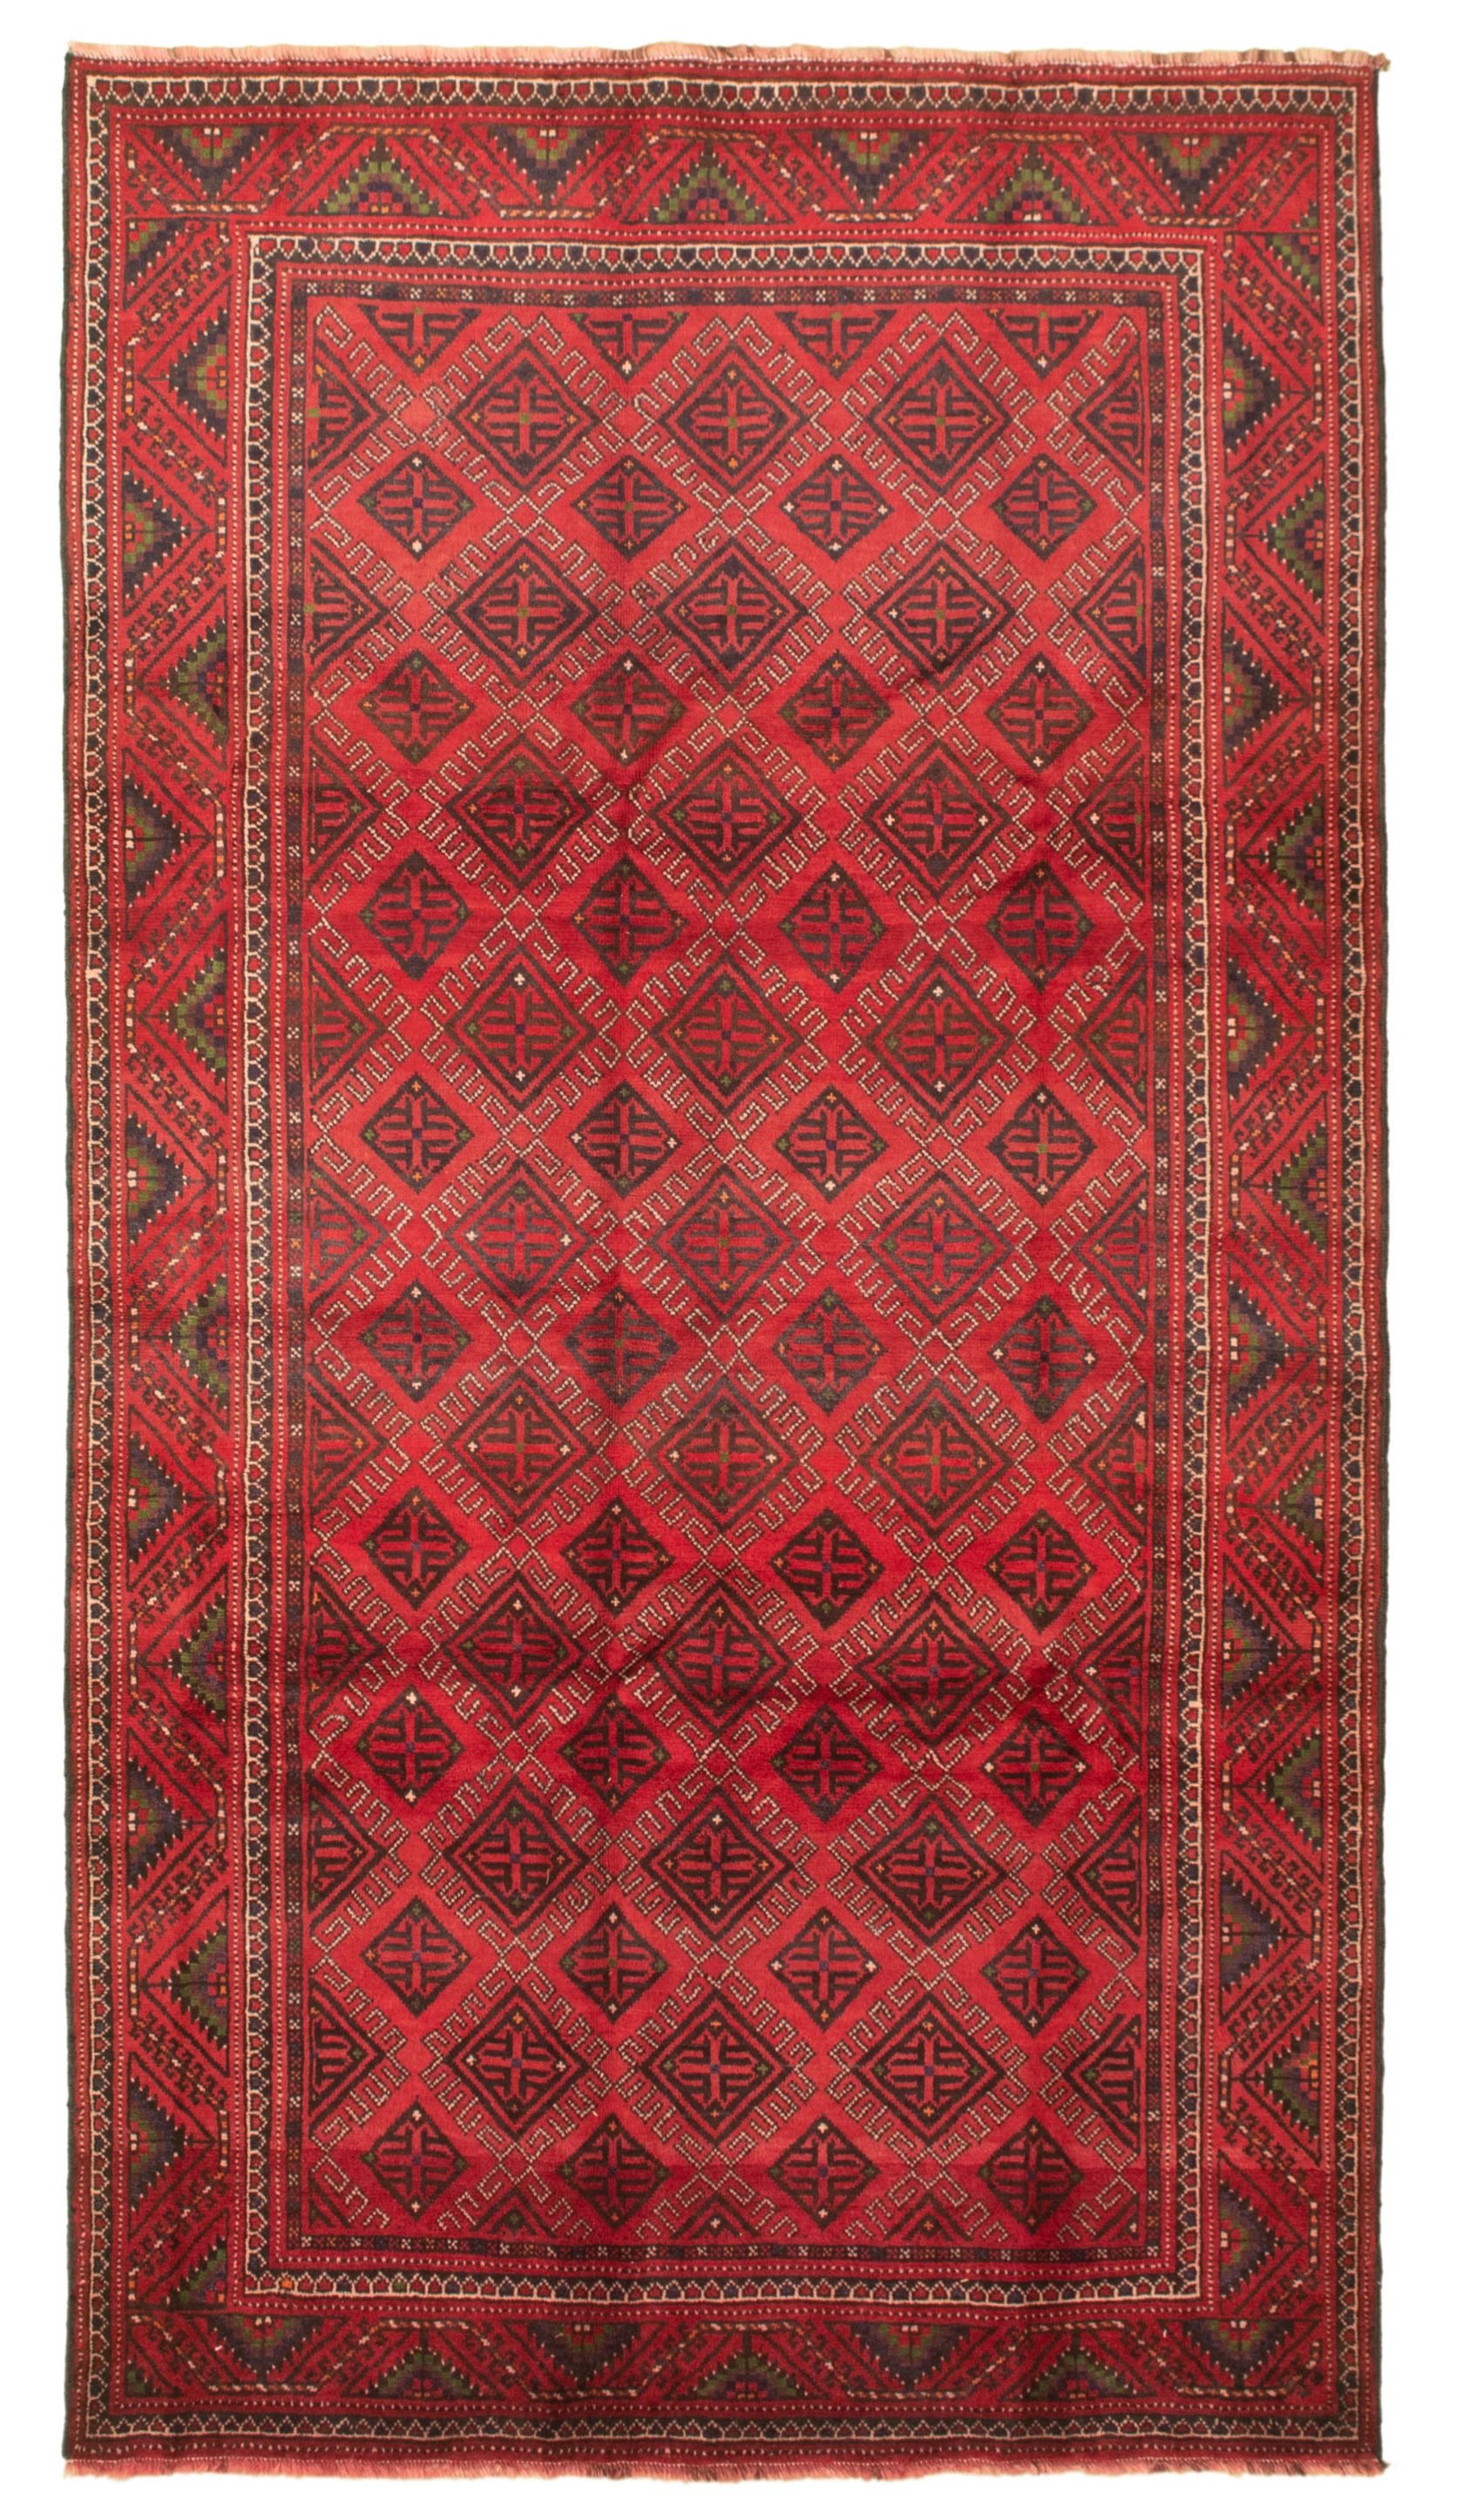 Hand-knotted Authentic Turkish Red Wool Rug 5'5" x 9'5" Size: 5'5" x 9'5"  